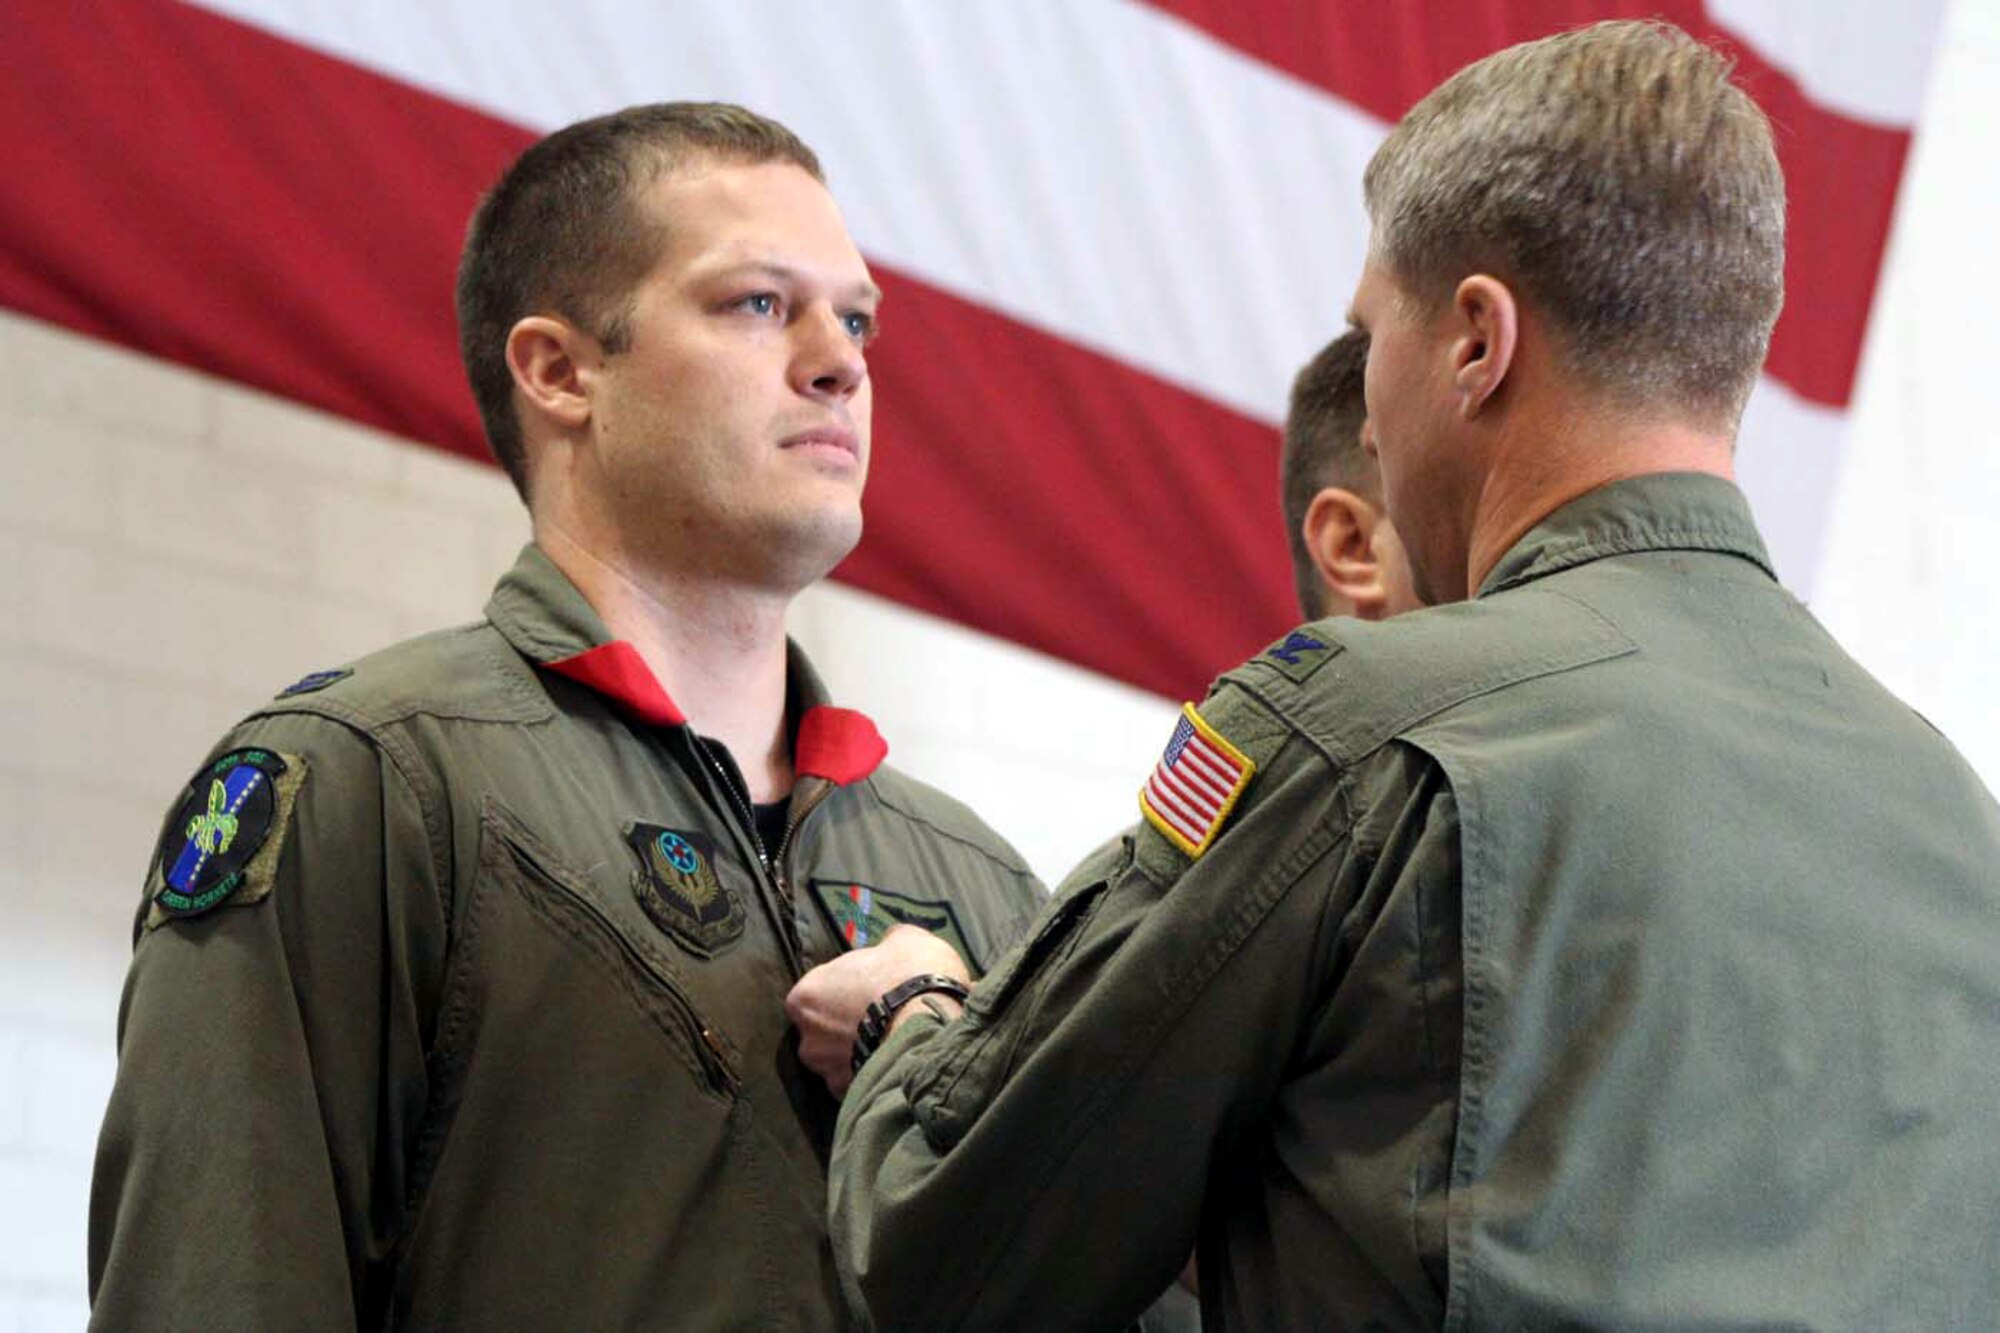 Capt. Matthew Berry, 20th Special Operations Squadron, receives his Distinguished Cross with Valor from Col. Mark Alsid, 20th SOS commander, during a ceremony Dec. 16 in Freedom Hangar. (U.S. Air Force photo by Senior Airman Heidi Davis)